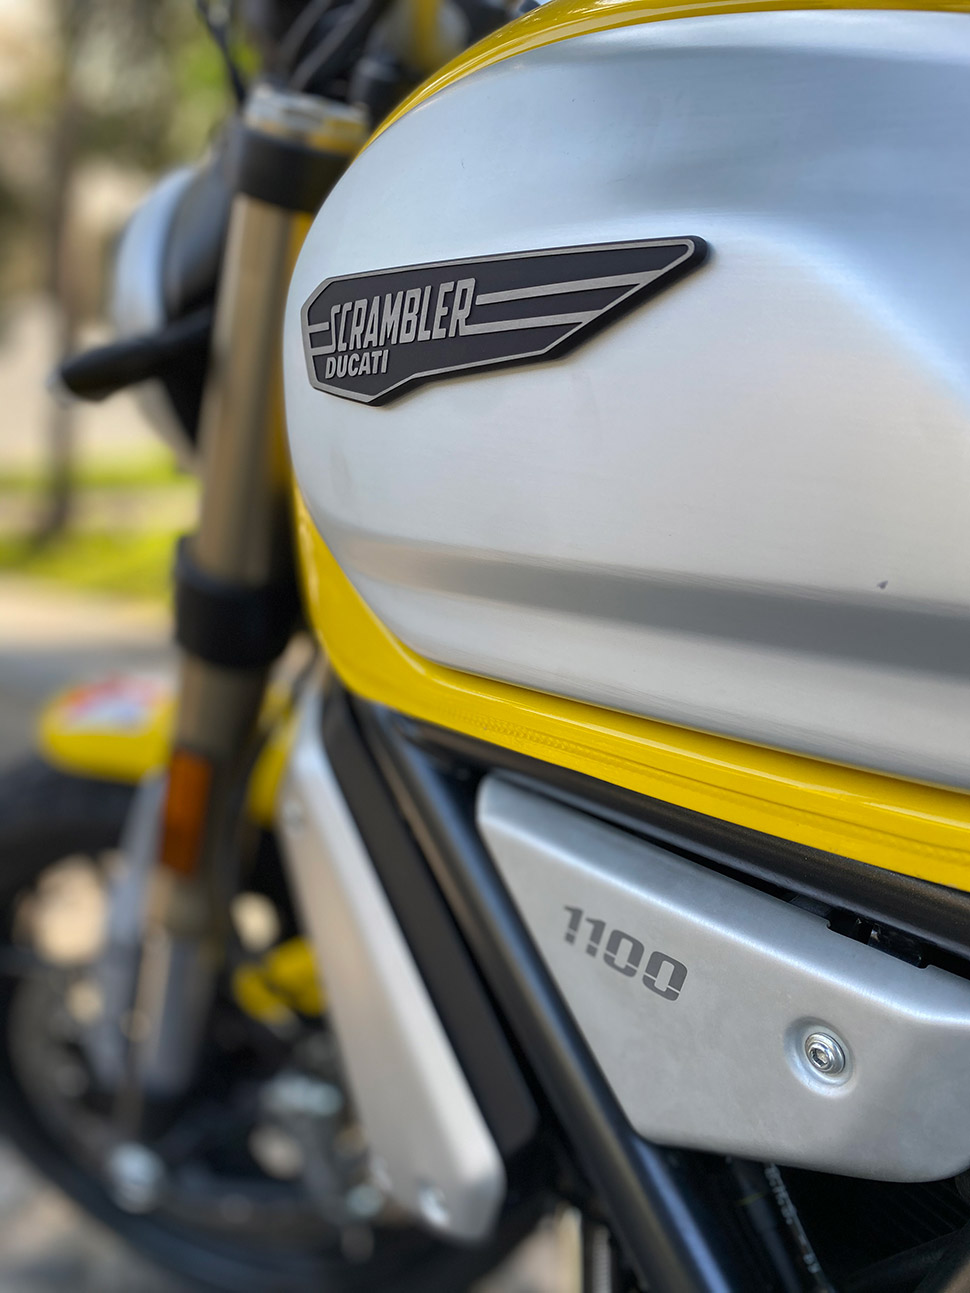 Is The Scrambler The Everyday Ducati